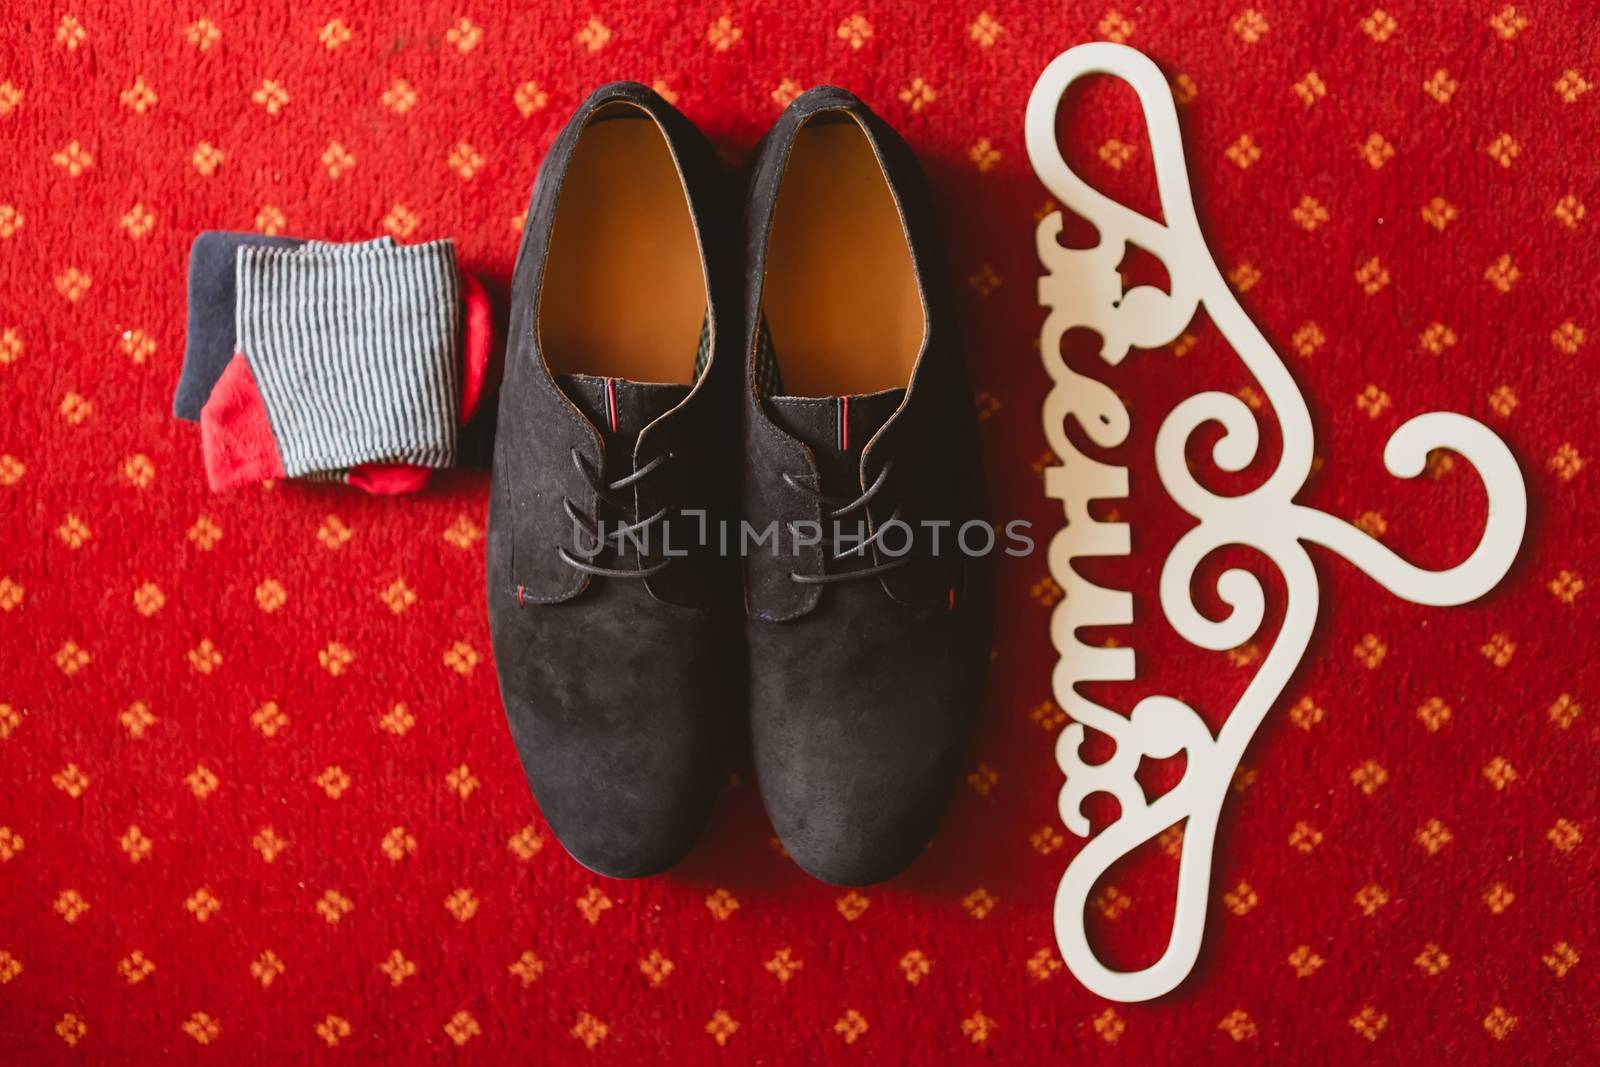 The groom's shoes and socks on the carpet